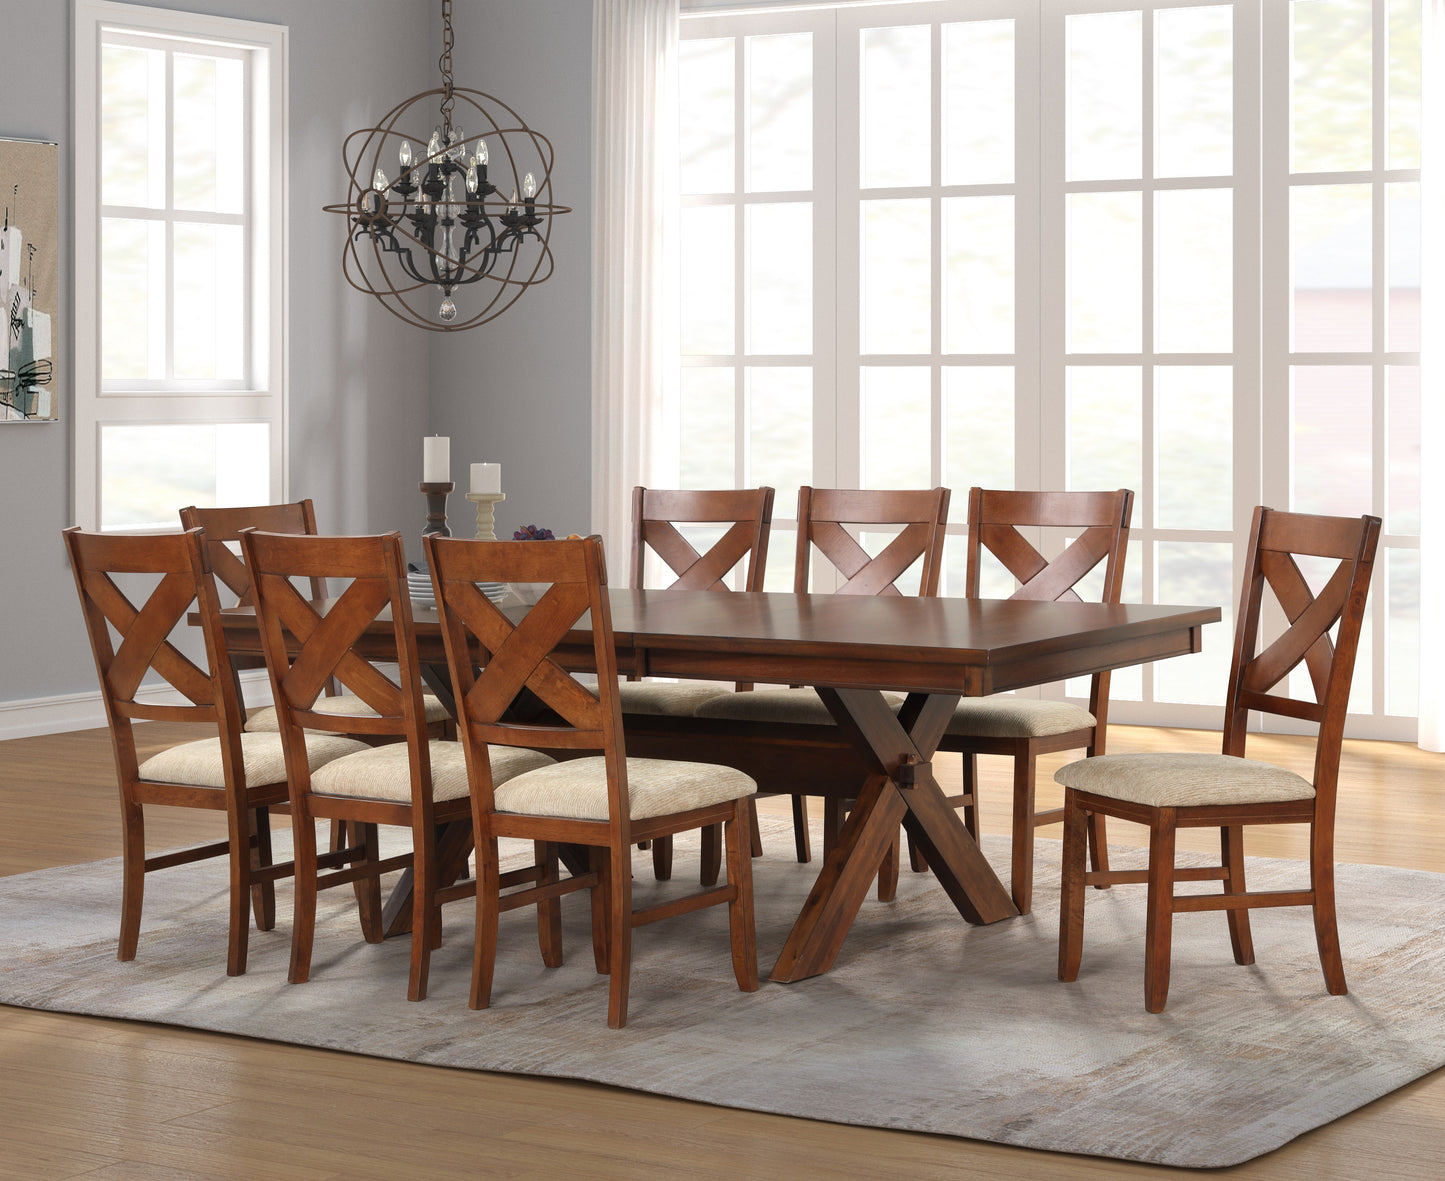 Karven Wood 9-Piece Dining Set, Extendable Trestle Dining Table with 8 Chairs, Dark Hazelnut